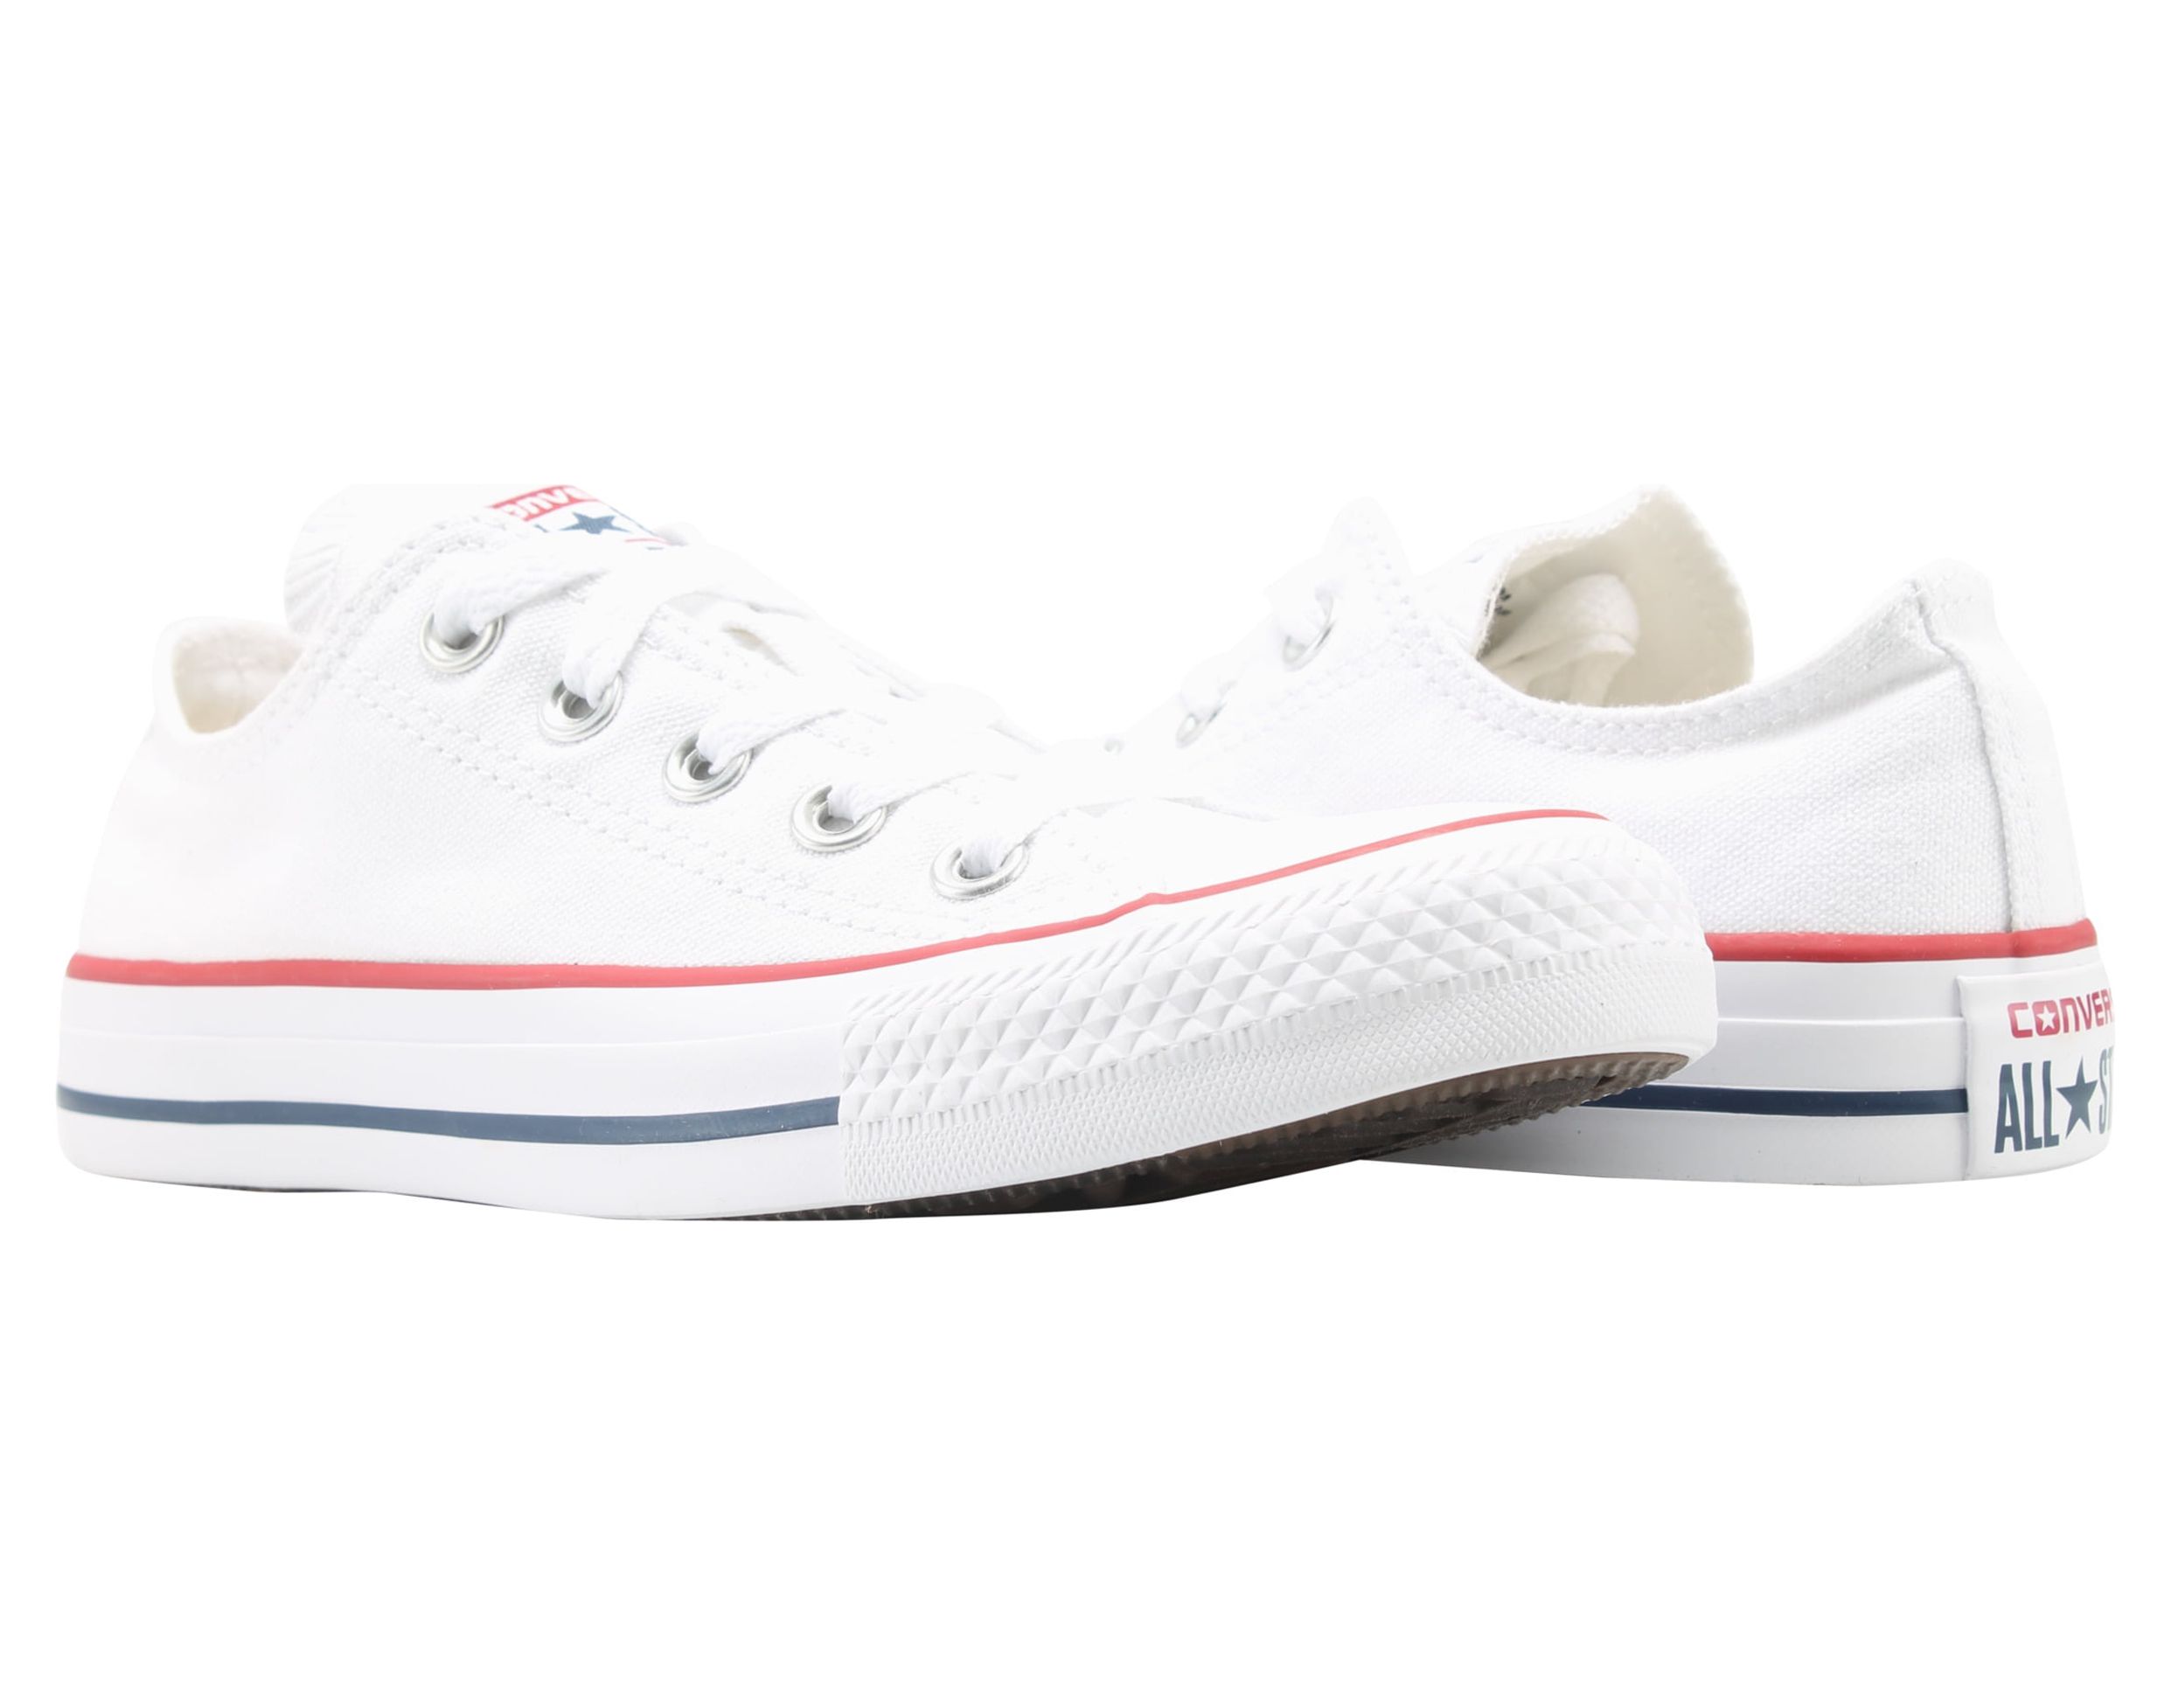 Converse M7652 / M7652C Chuck Taylor All Star Low Top Canvas Optical White - image 1 of 6